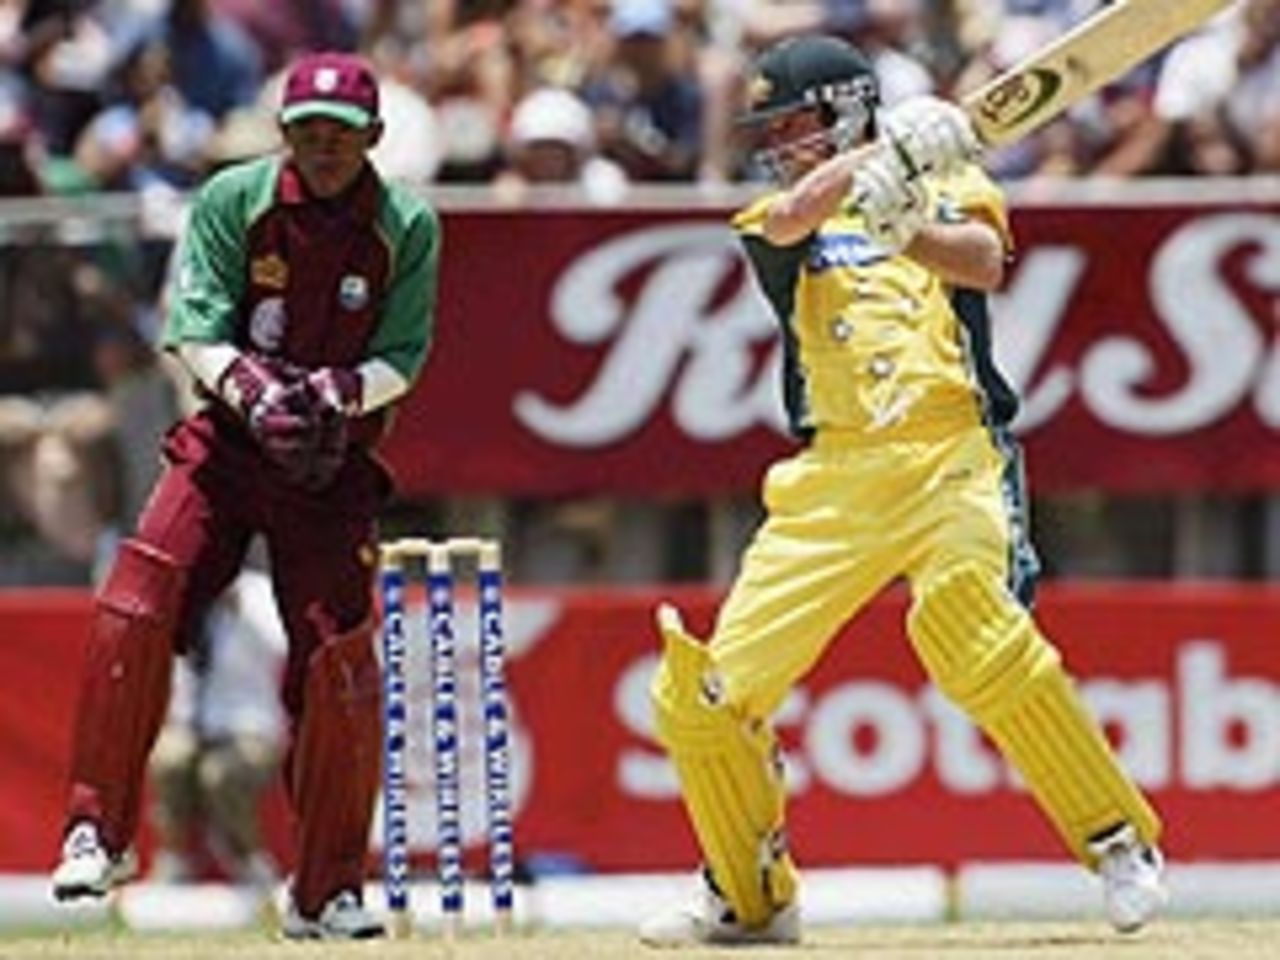 Ian Harvey drives during his vital innings of 48 not out from 30 balls